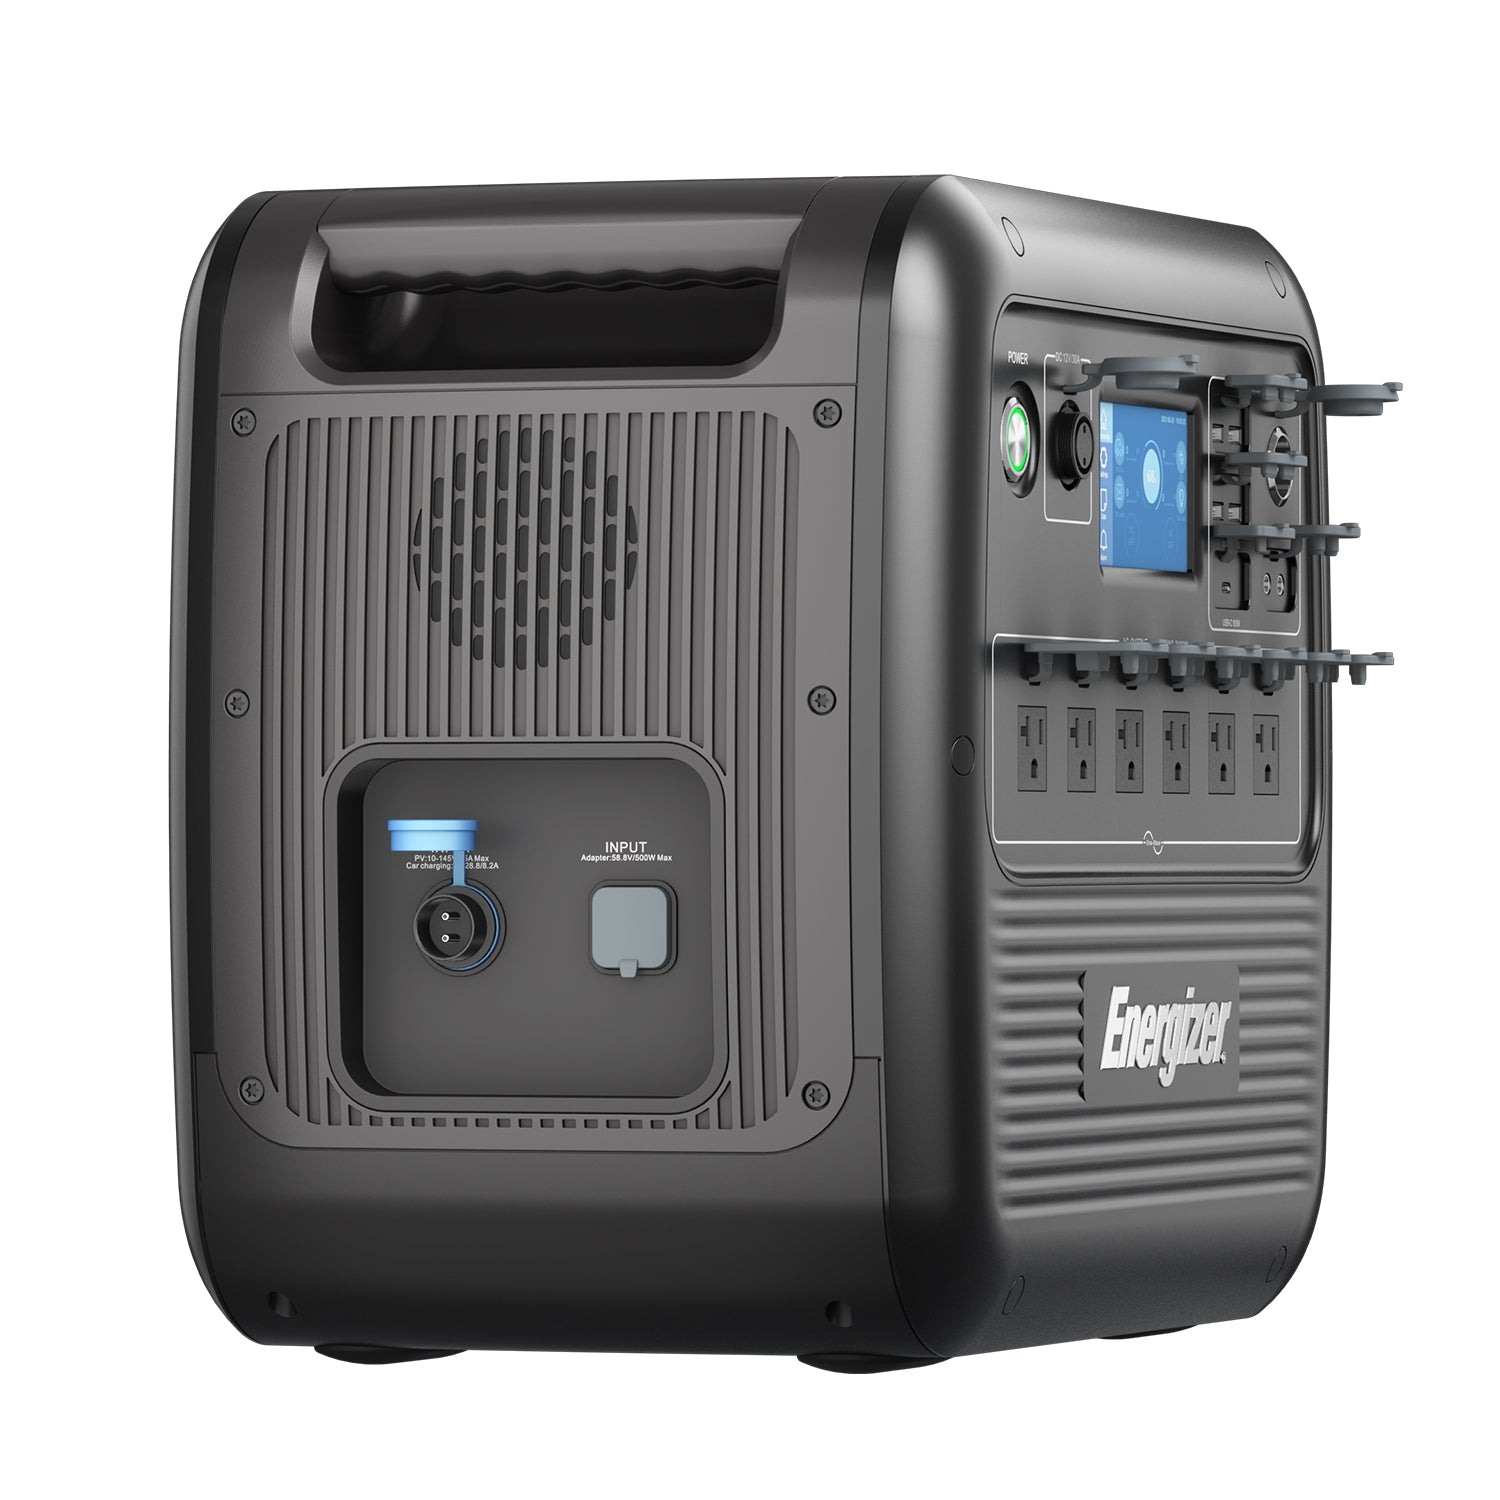 Energizer PPS2000 - 2150 Wh / 2100 W